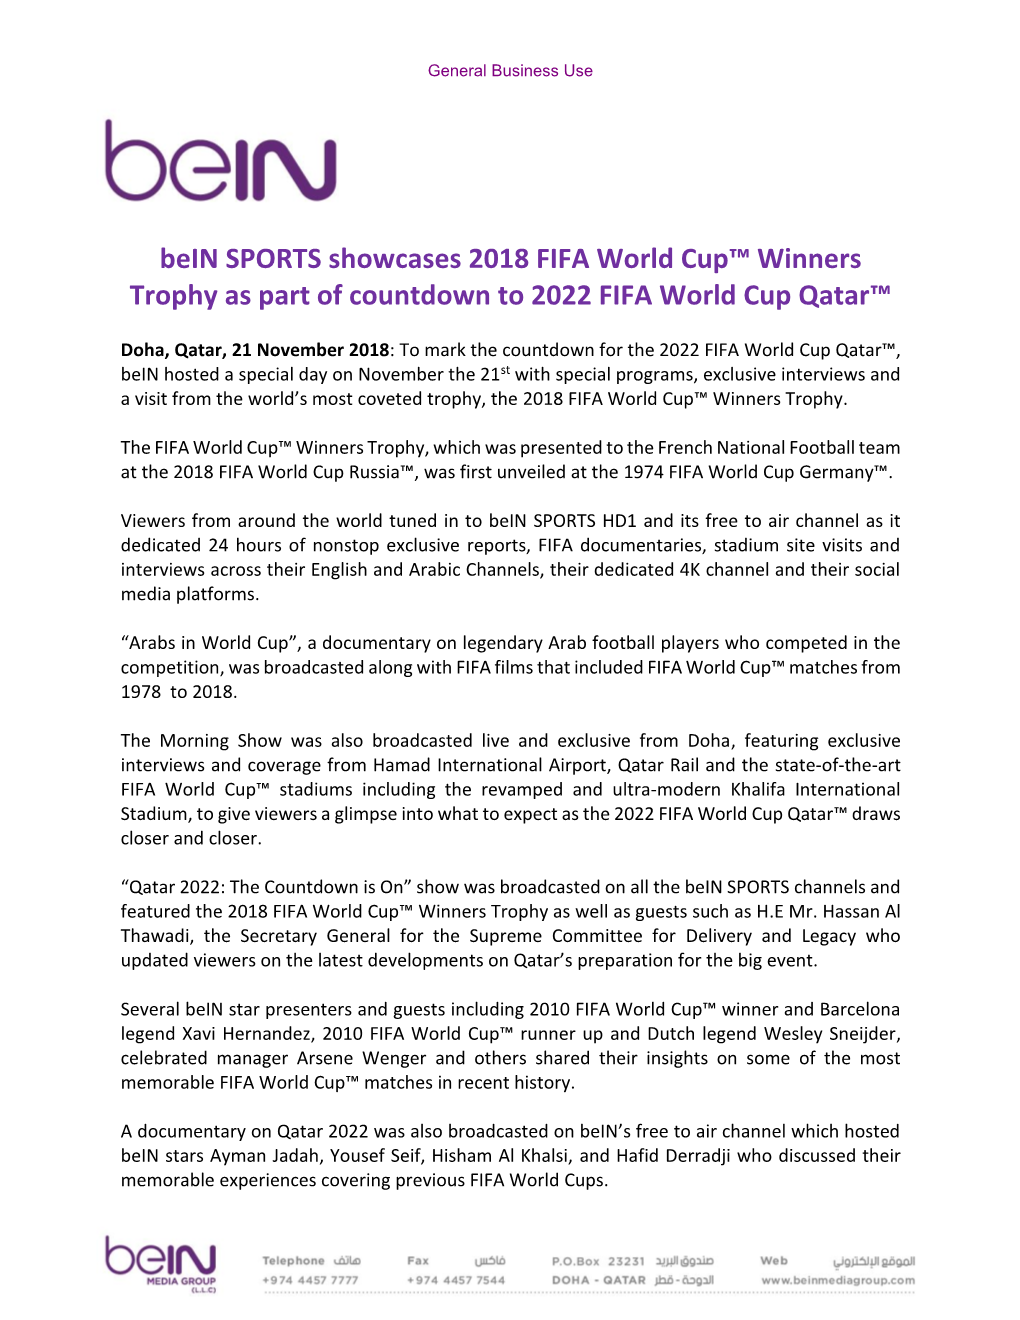 Bein SPORTS Showcases 2018 FIFA World Cup™ Winners Trophy As Part of Countdown to 2022 FIFA World Cup Qatar™